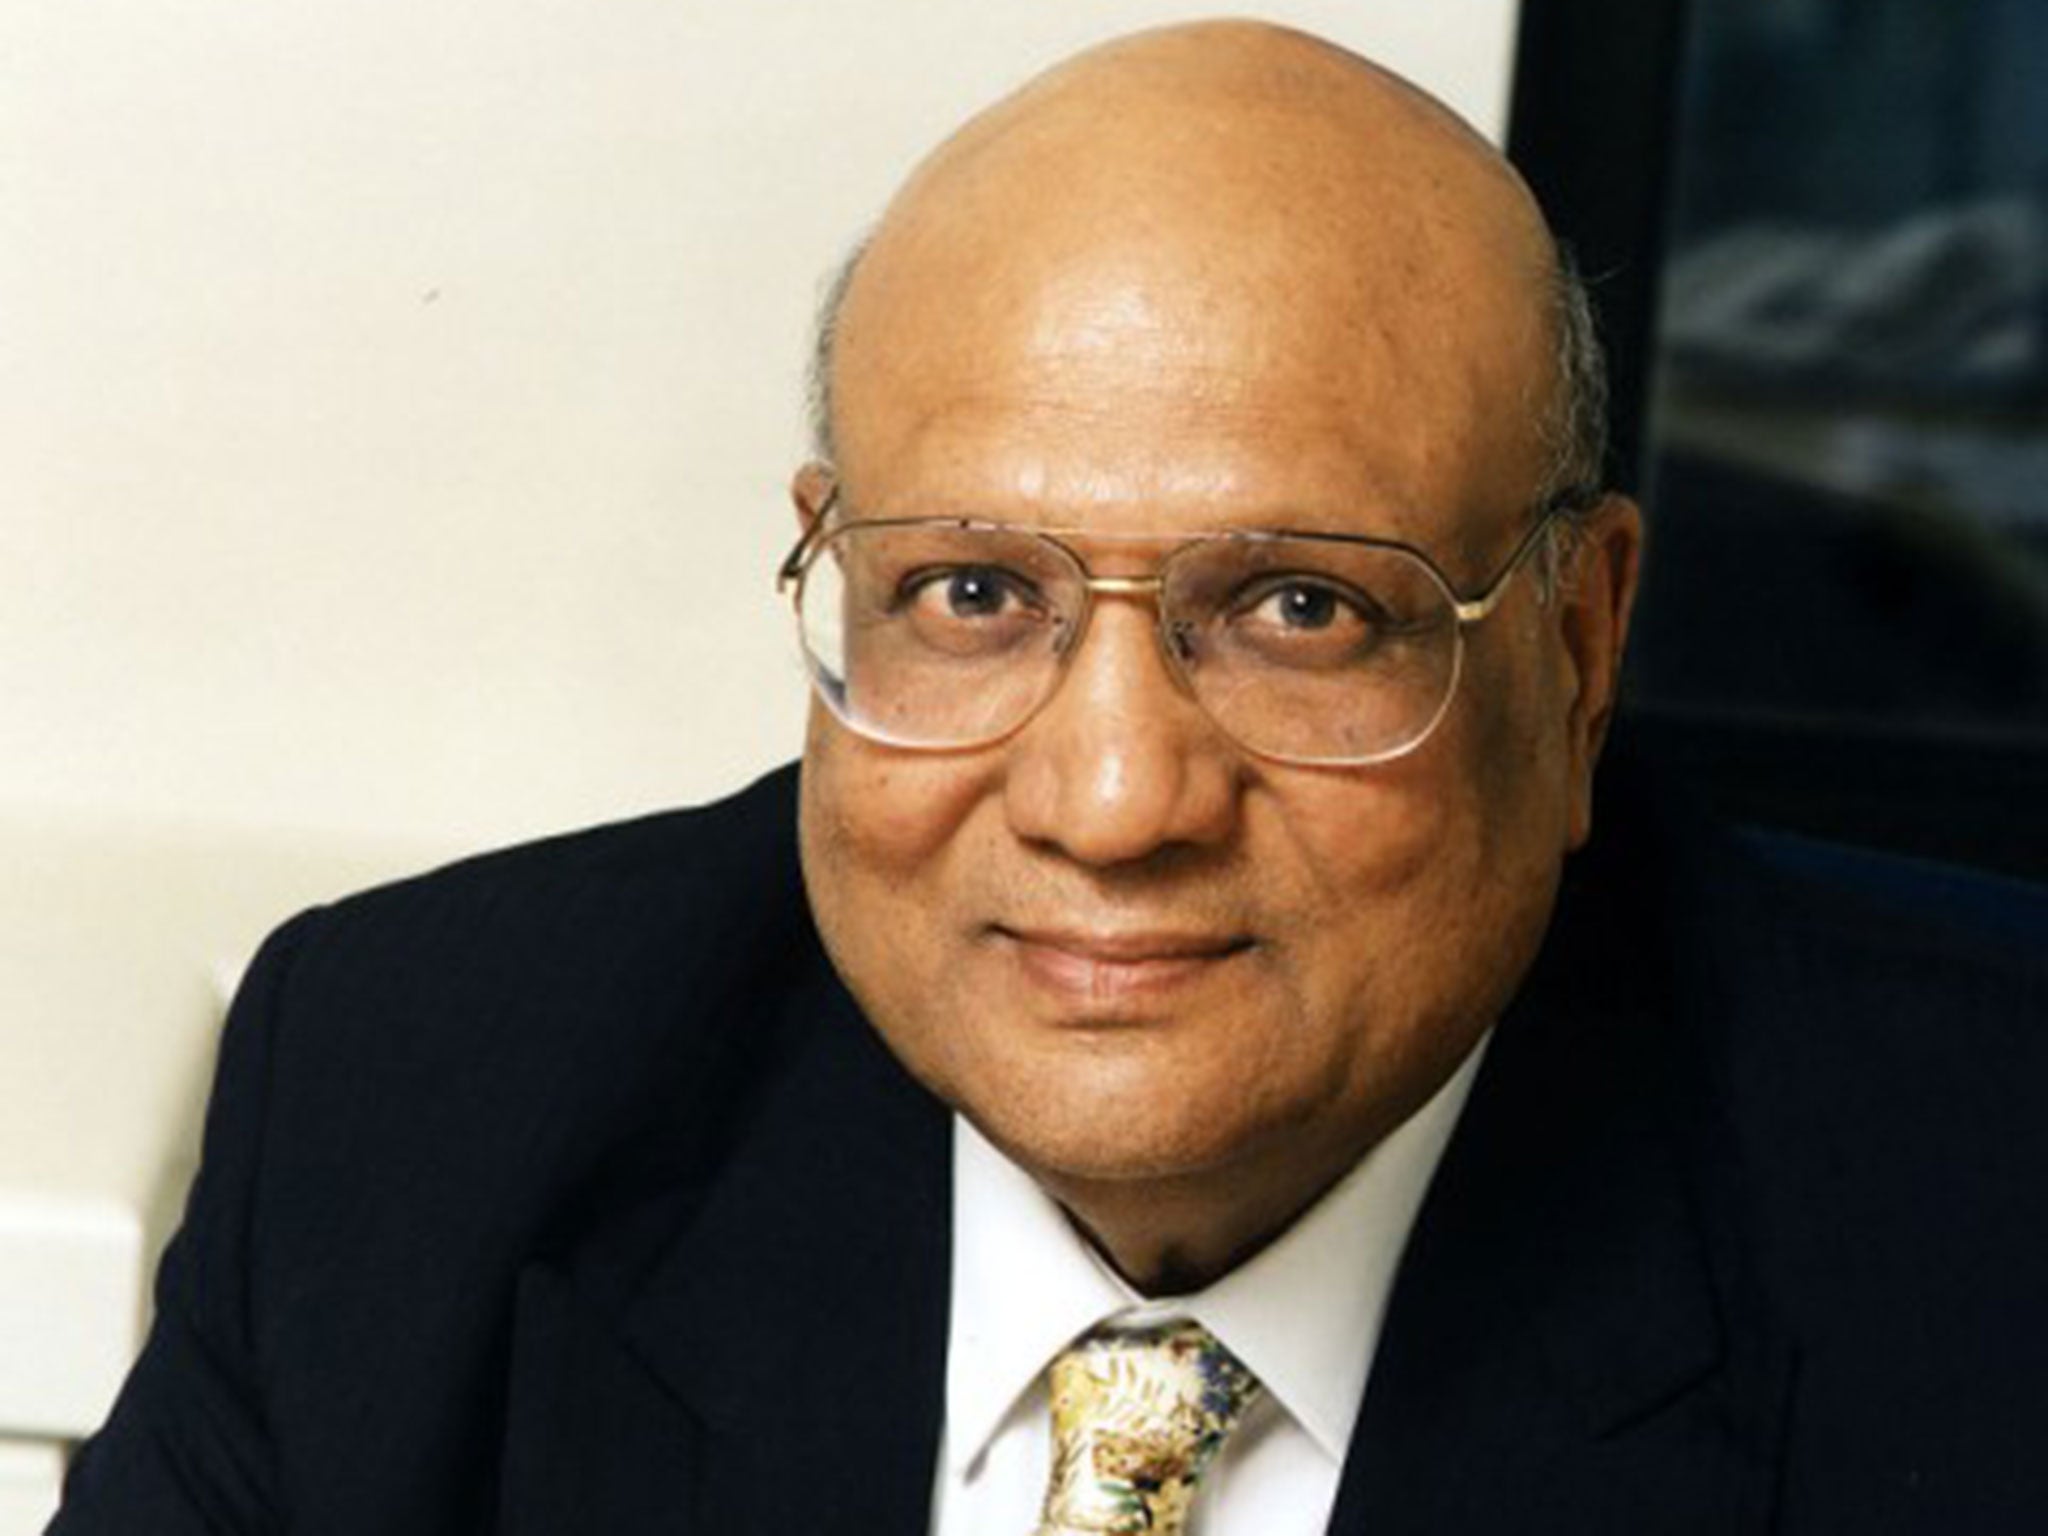 Mr Paul's father was Lord Swraj Paul, who founded the company in 1968